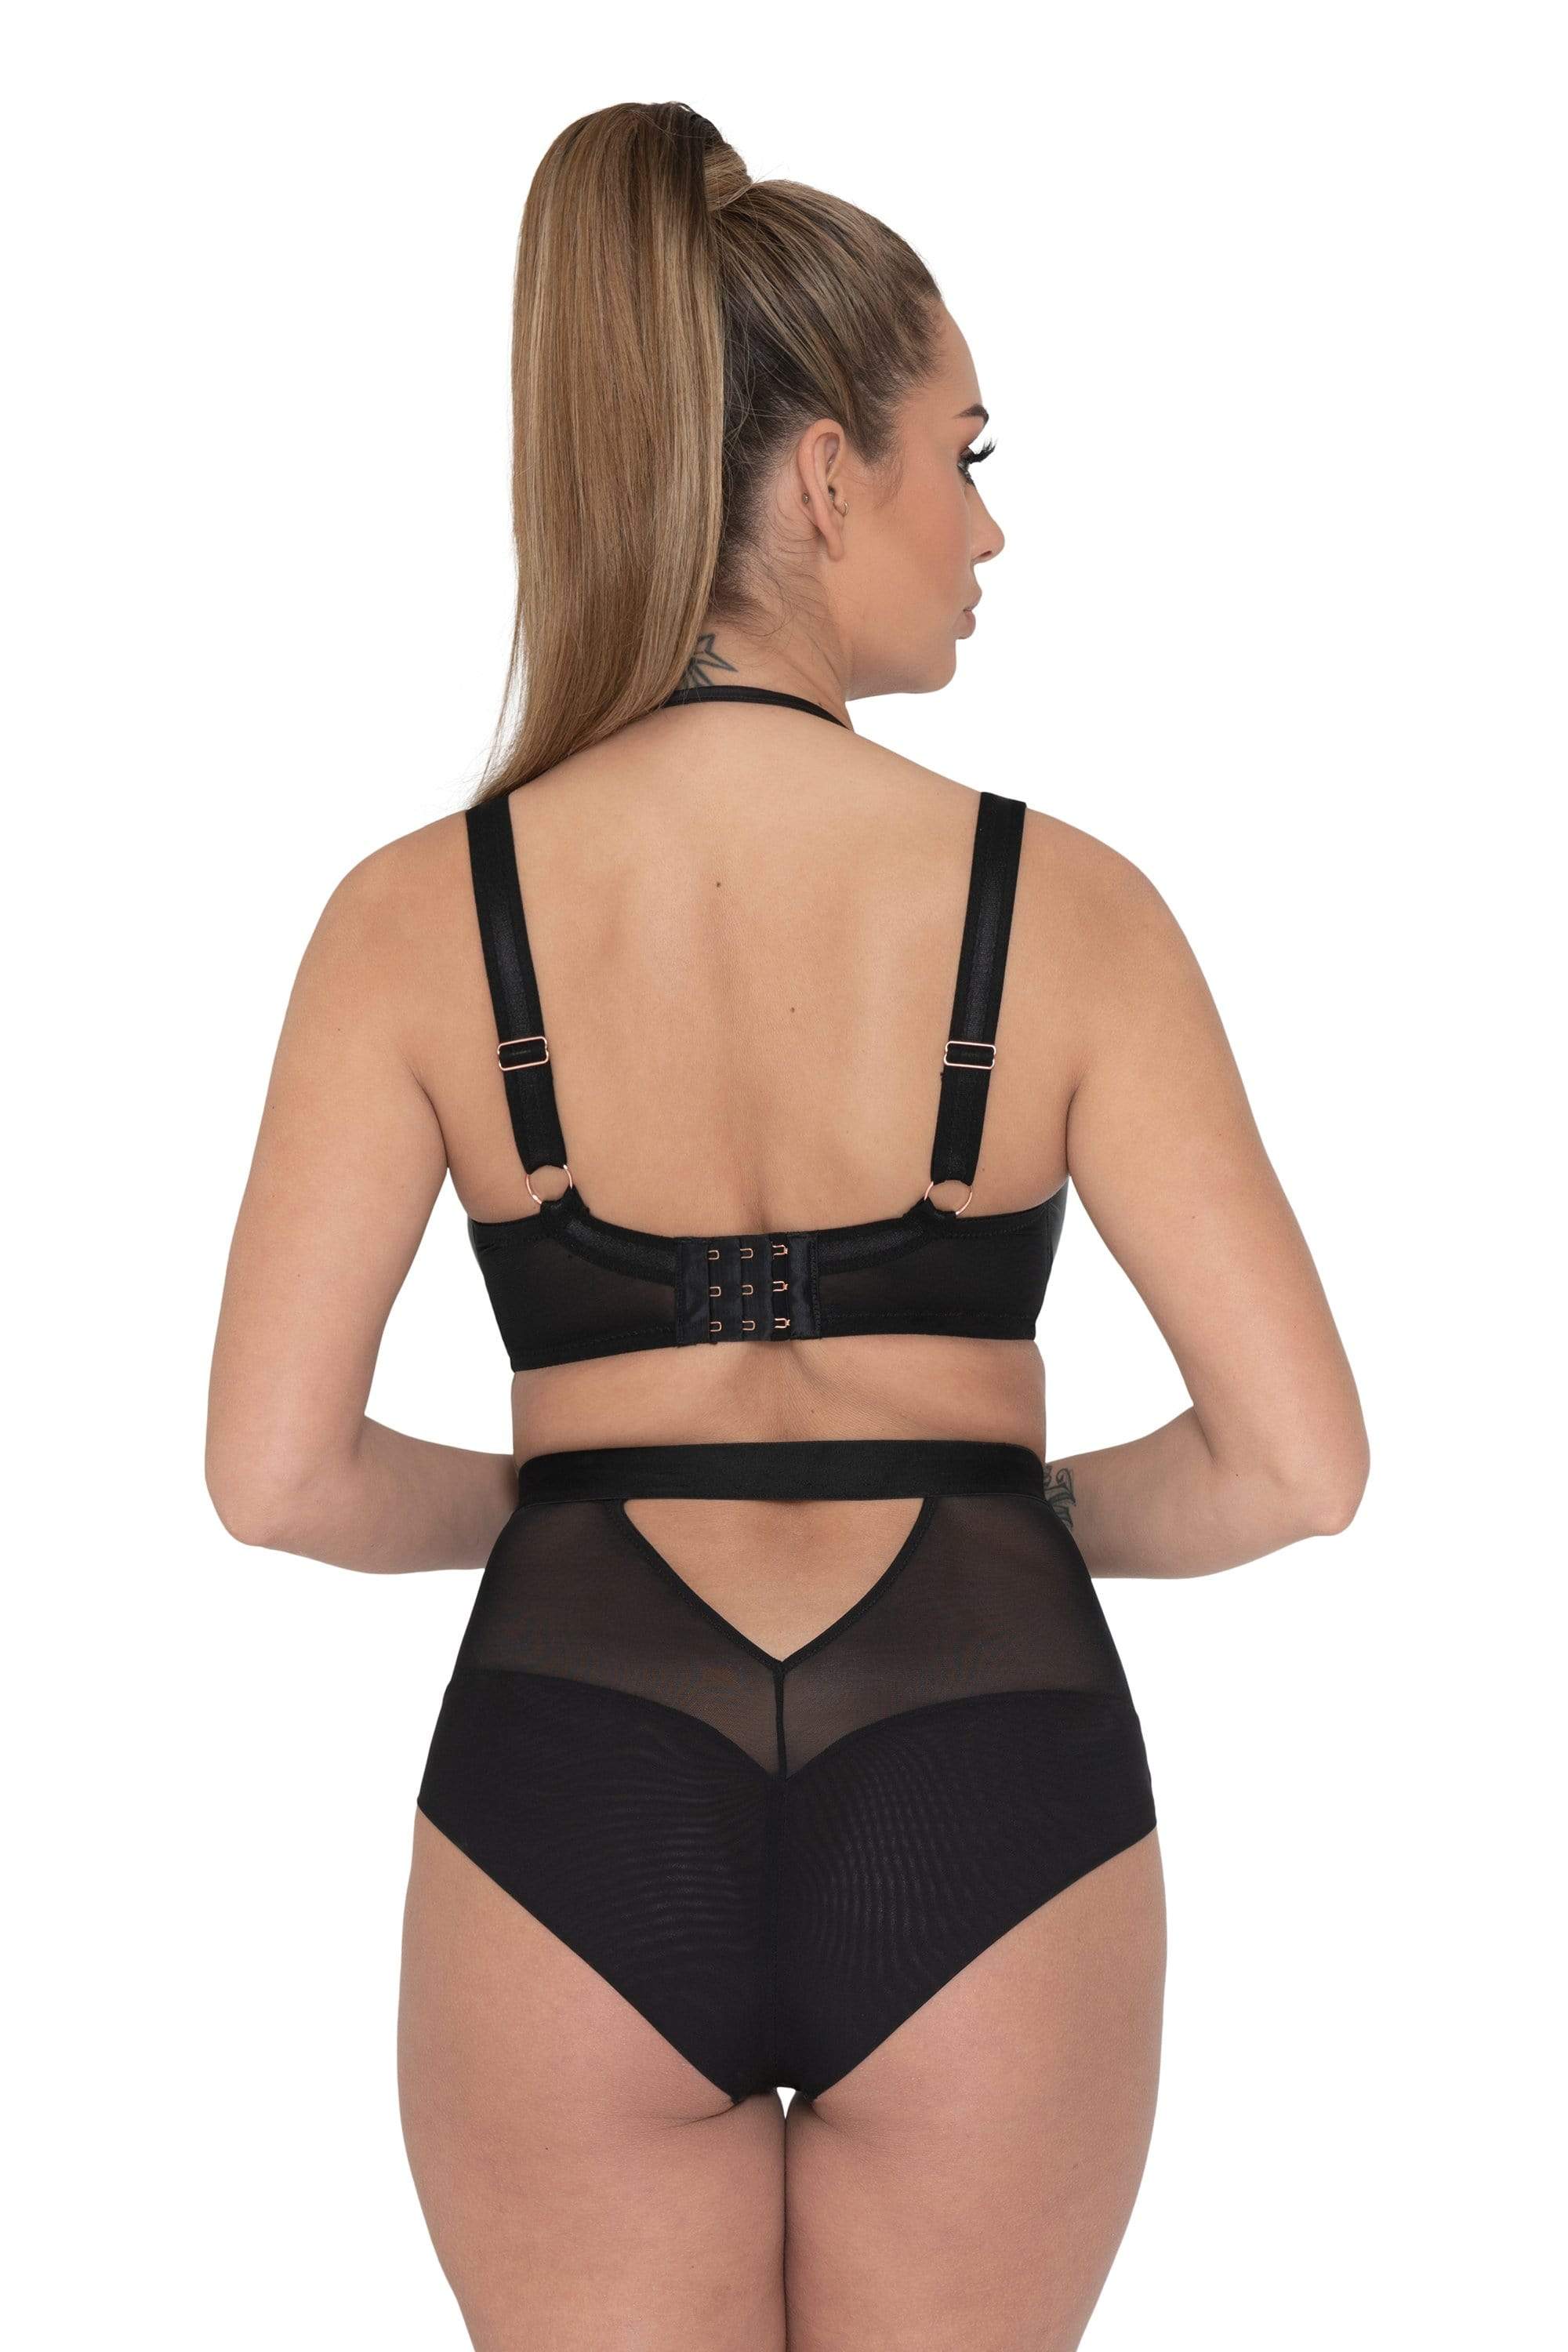 Playful Promises  Scantilly Harnessed High Waist Brief Black